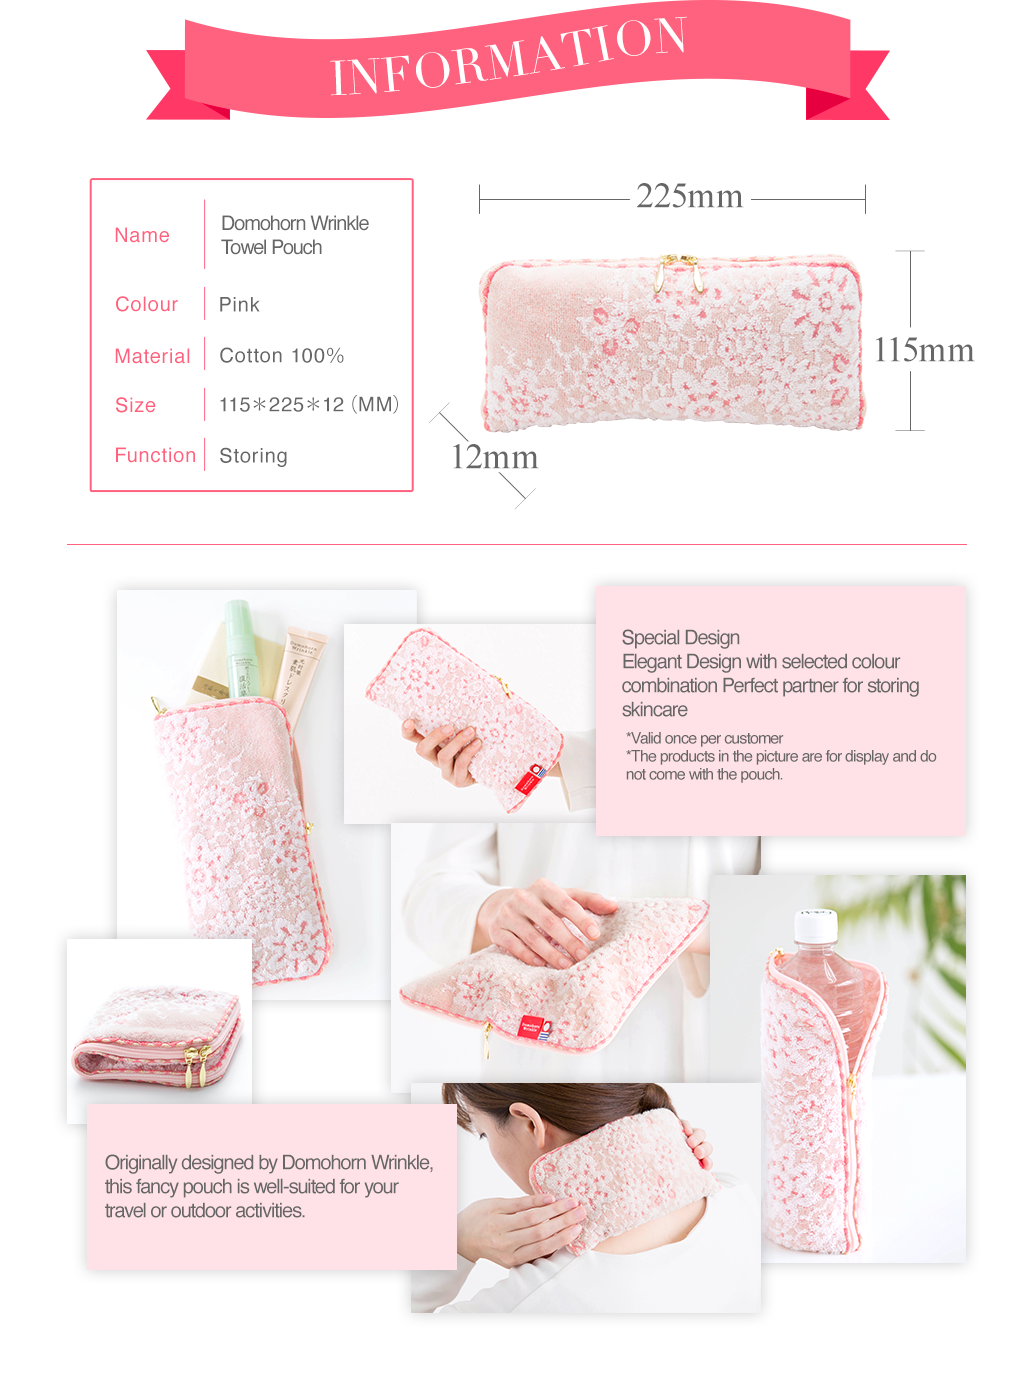 INFORMATION Name Domohorn WrinkleTowel Pouch Colour Pink Material Cotton 100％ Size 115＊225＊12（MM） Function Storing Special Design Elegant Design with selected colour combination Perfect partner for storing skincare Handy zipped up design for skincare storage *Valid once per customer *The products in the picture are for display and do not come with the pouch. Originally designed by Domohorn Wrinkle, this fancy pouch is well-suited for your travel or outdoor activities.